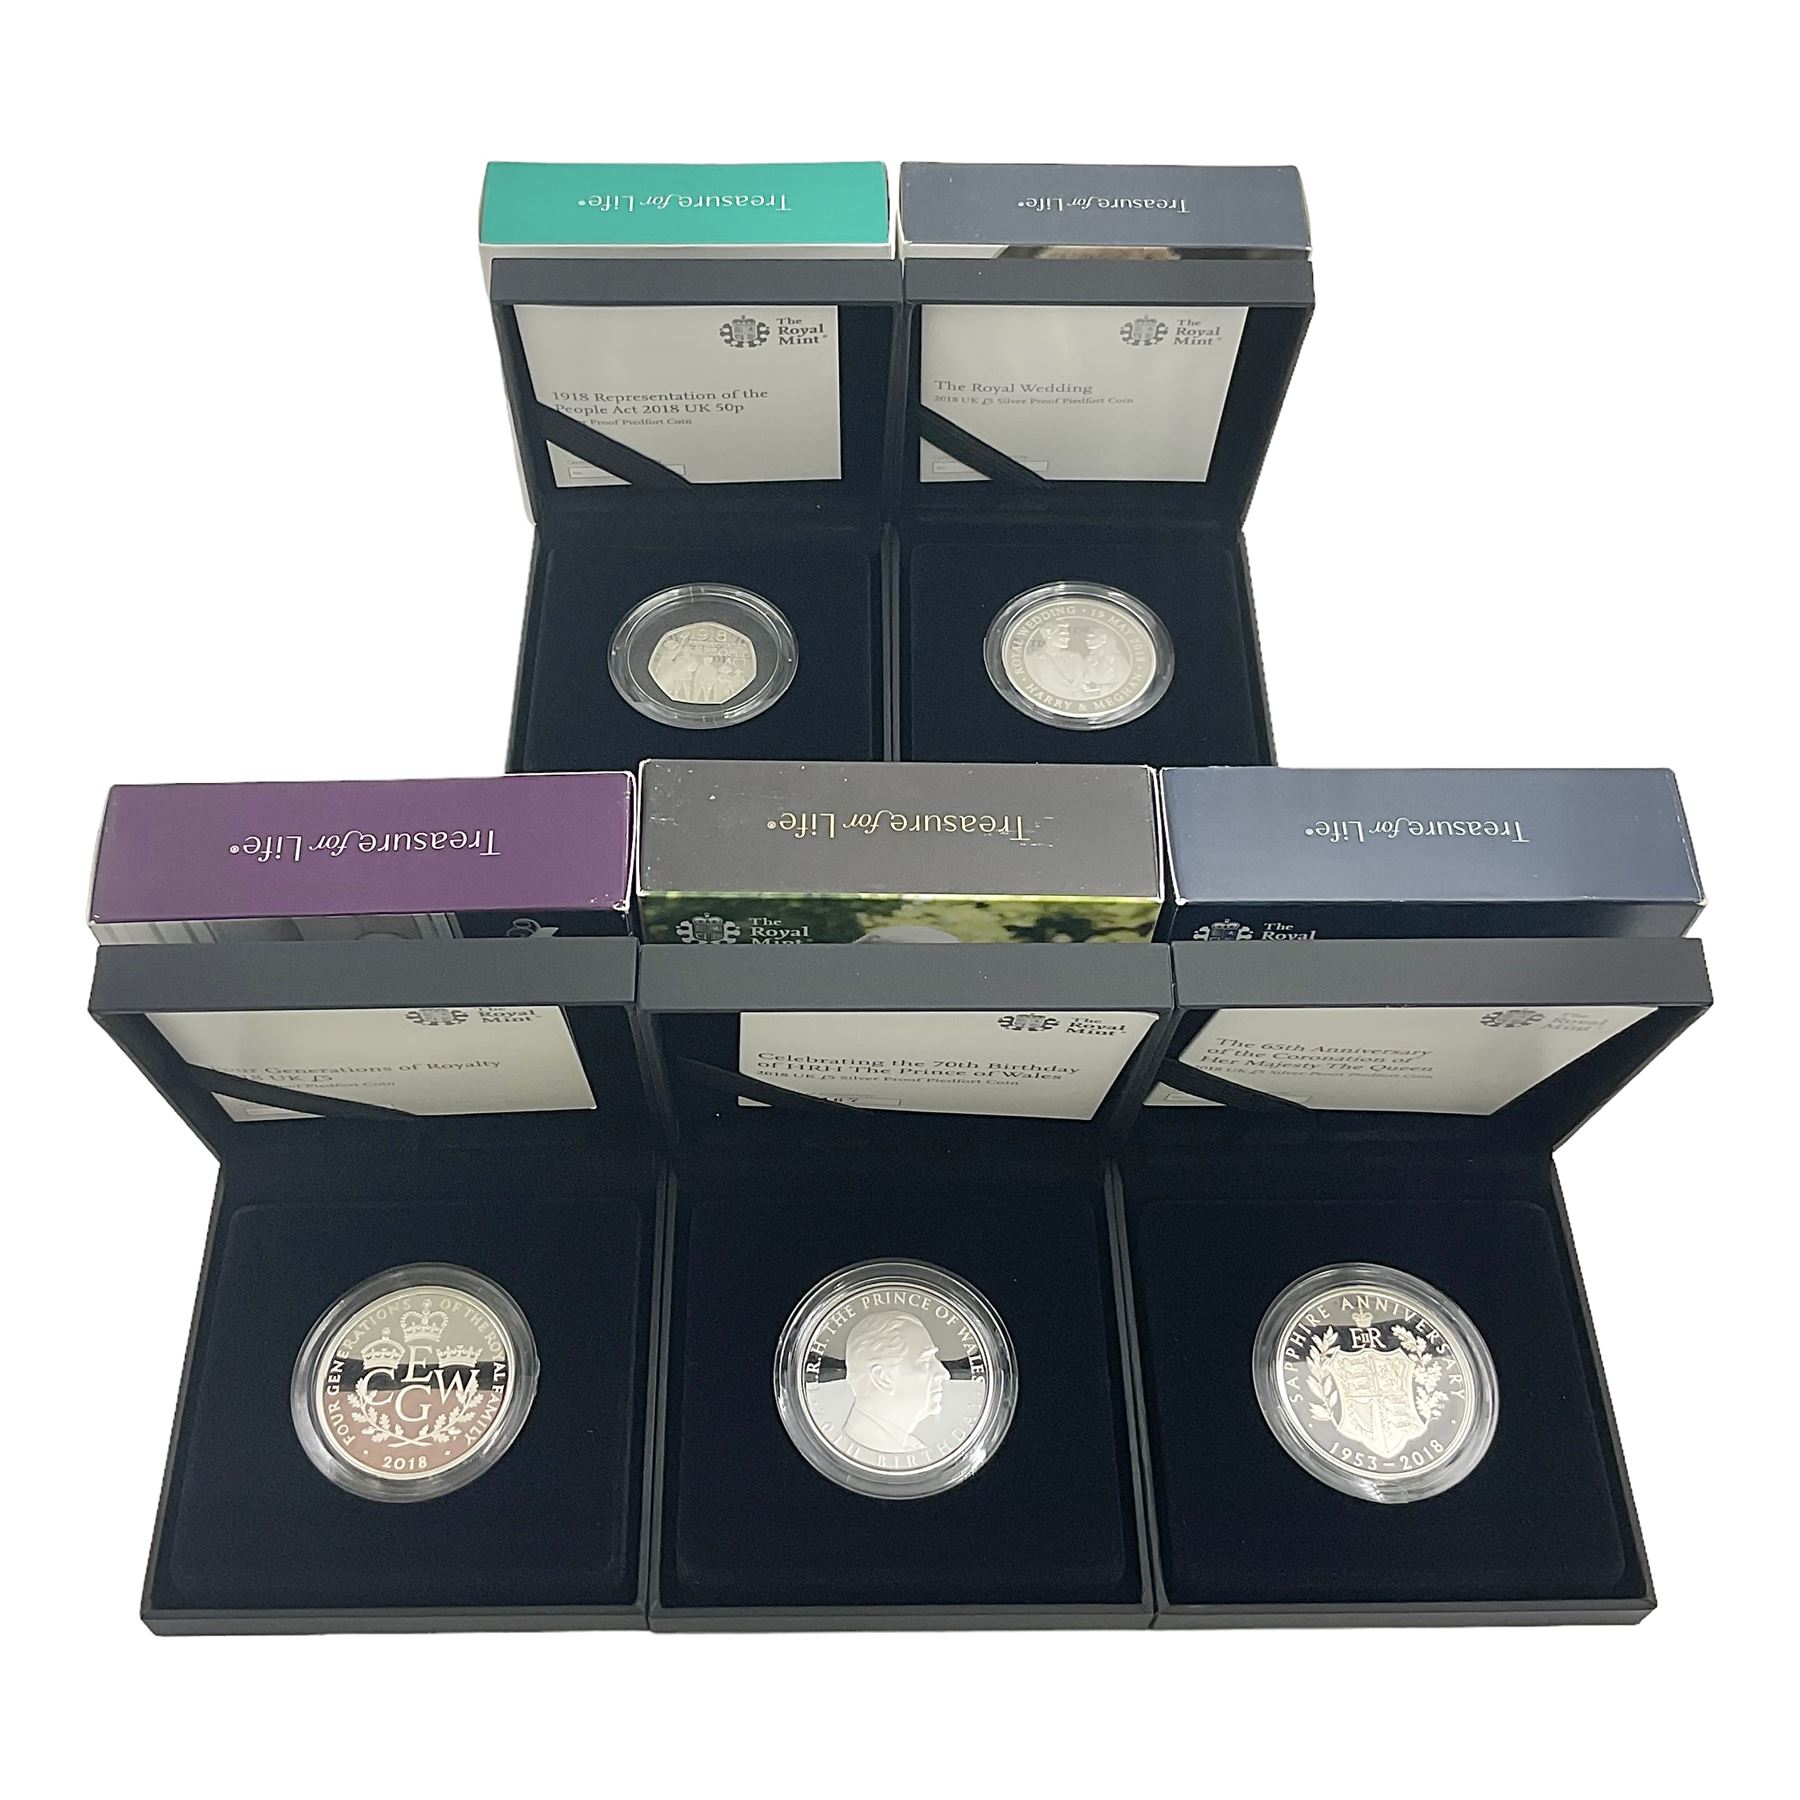 Five The Royal Mint United Kingdom 2018 silver proof piedfort five pound coins